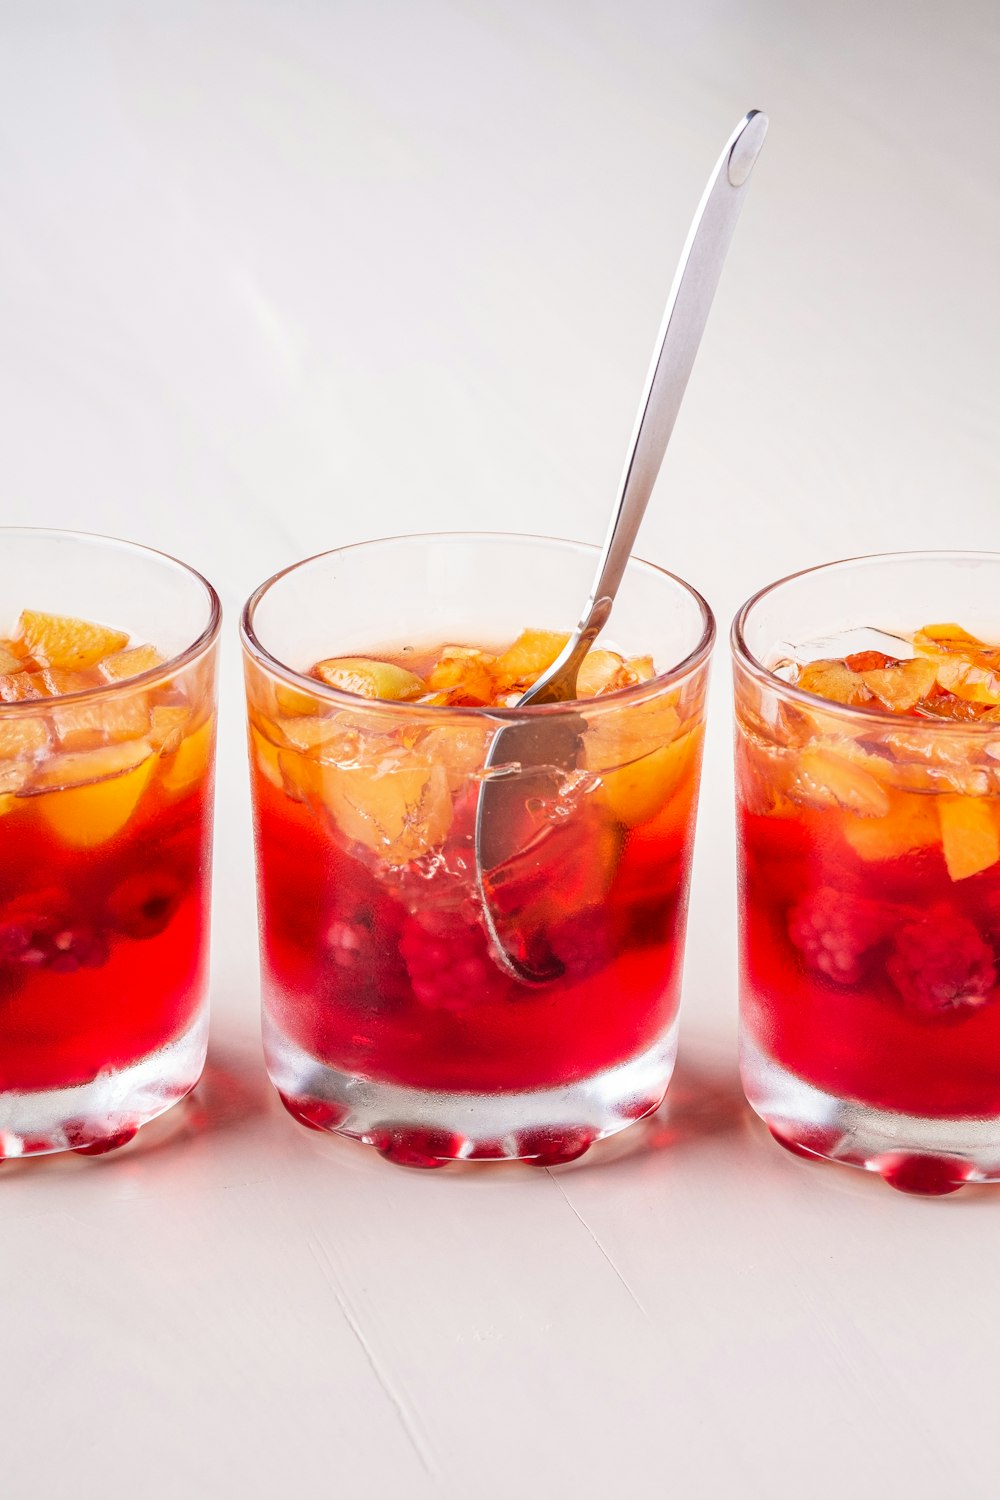 three glasses filled with fruit and a spoon